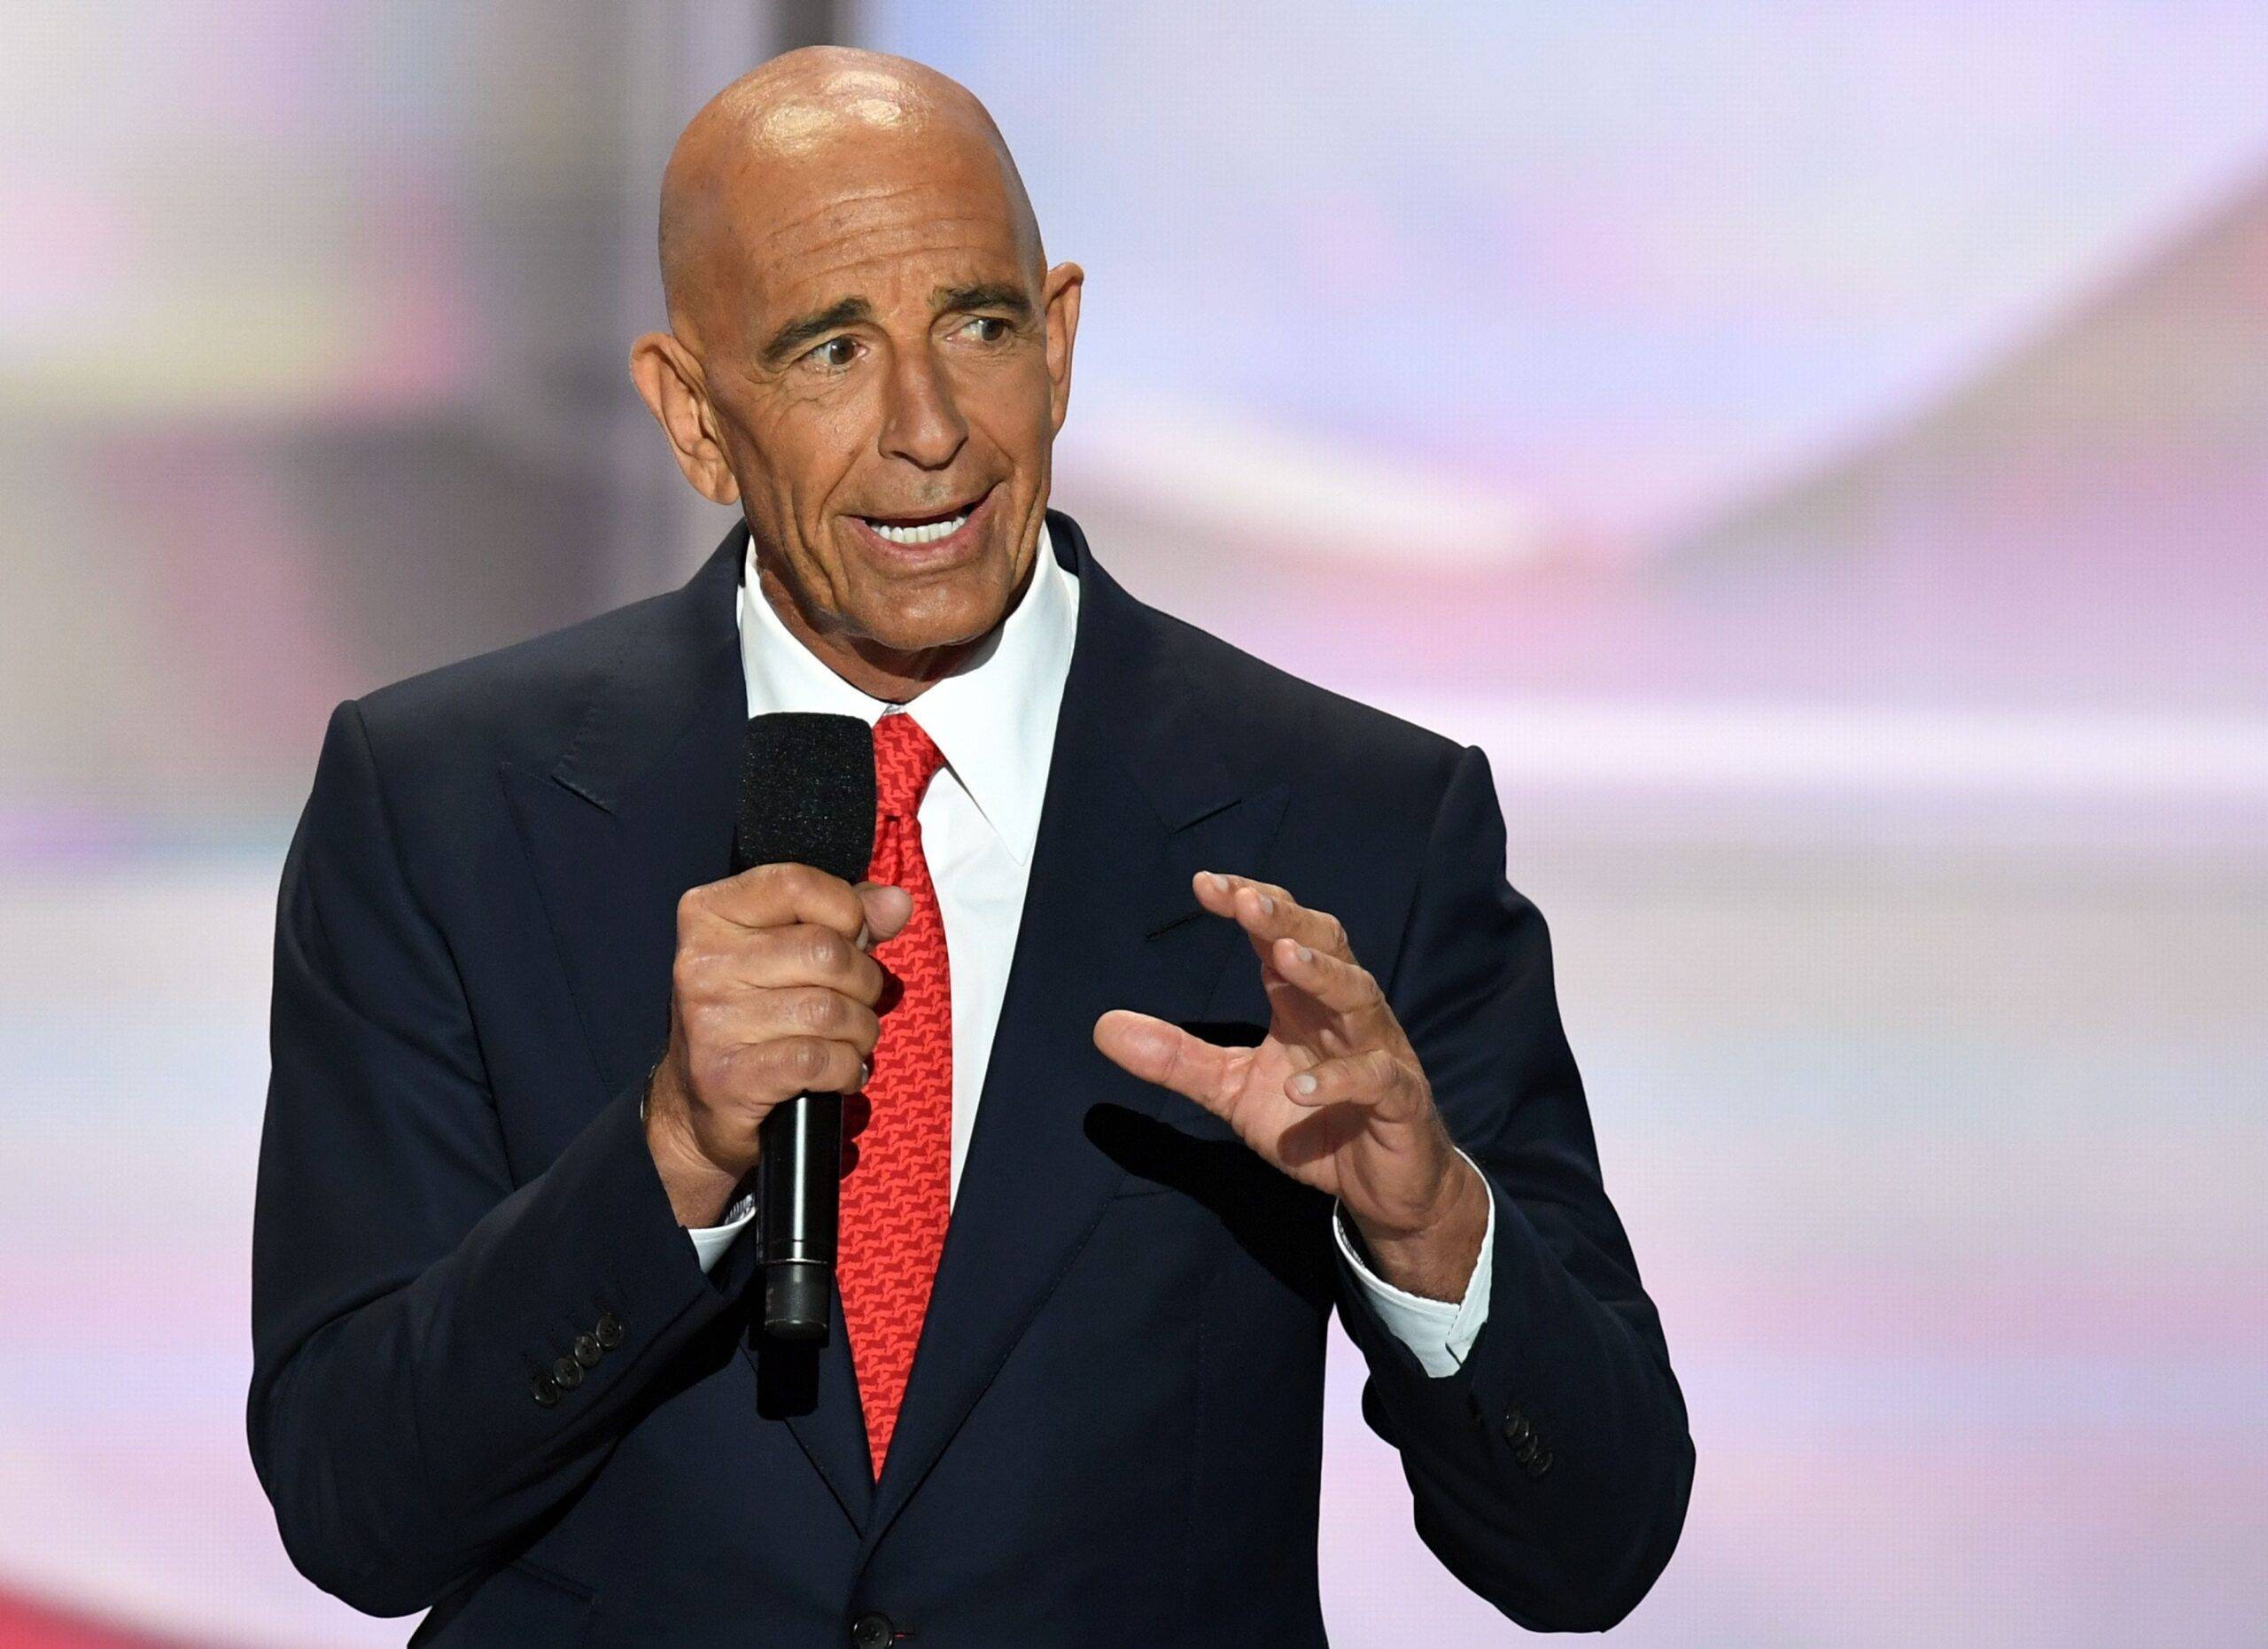 CEO of Colony Capital Tom Barrack speaks on the last day of the Republican National Convention on 21 July 21, in Cleveland, Ohio. [Jim Watson/AFP/Getty Images]